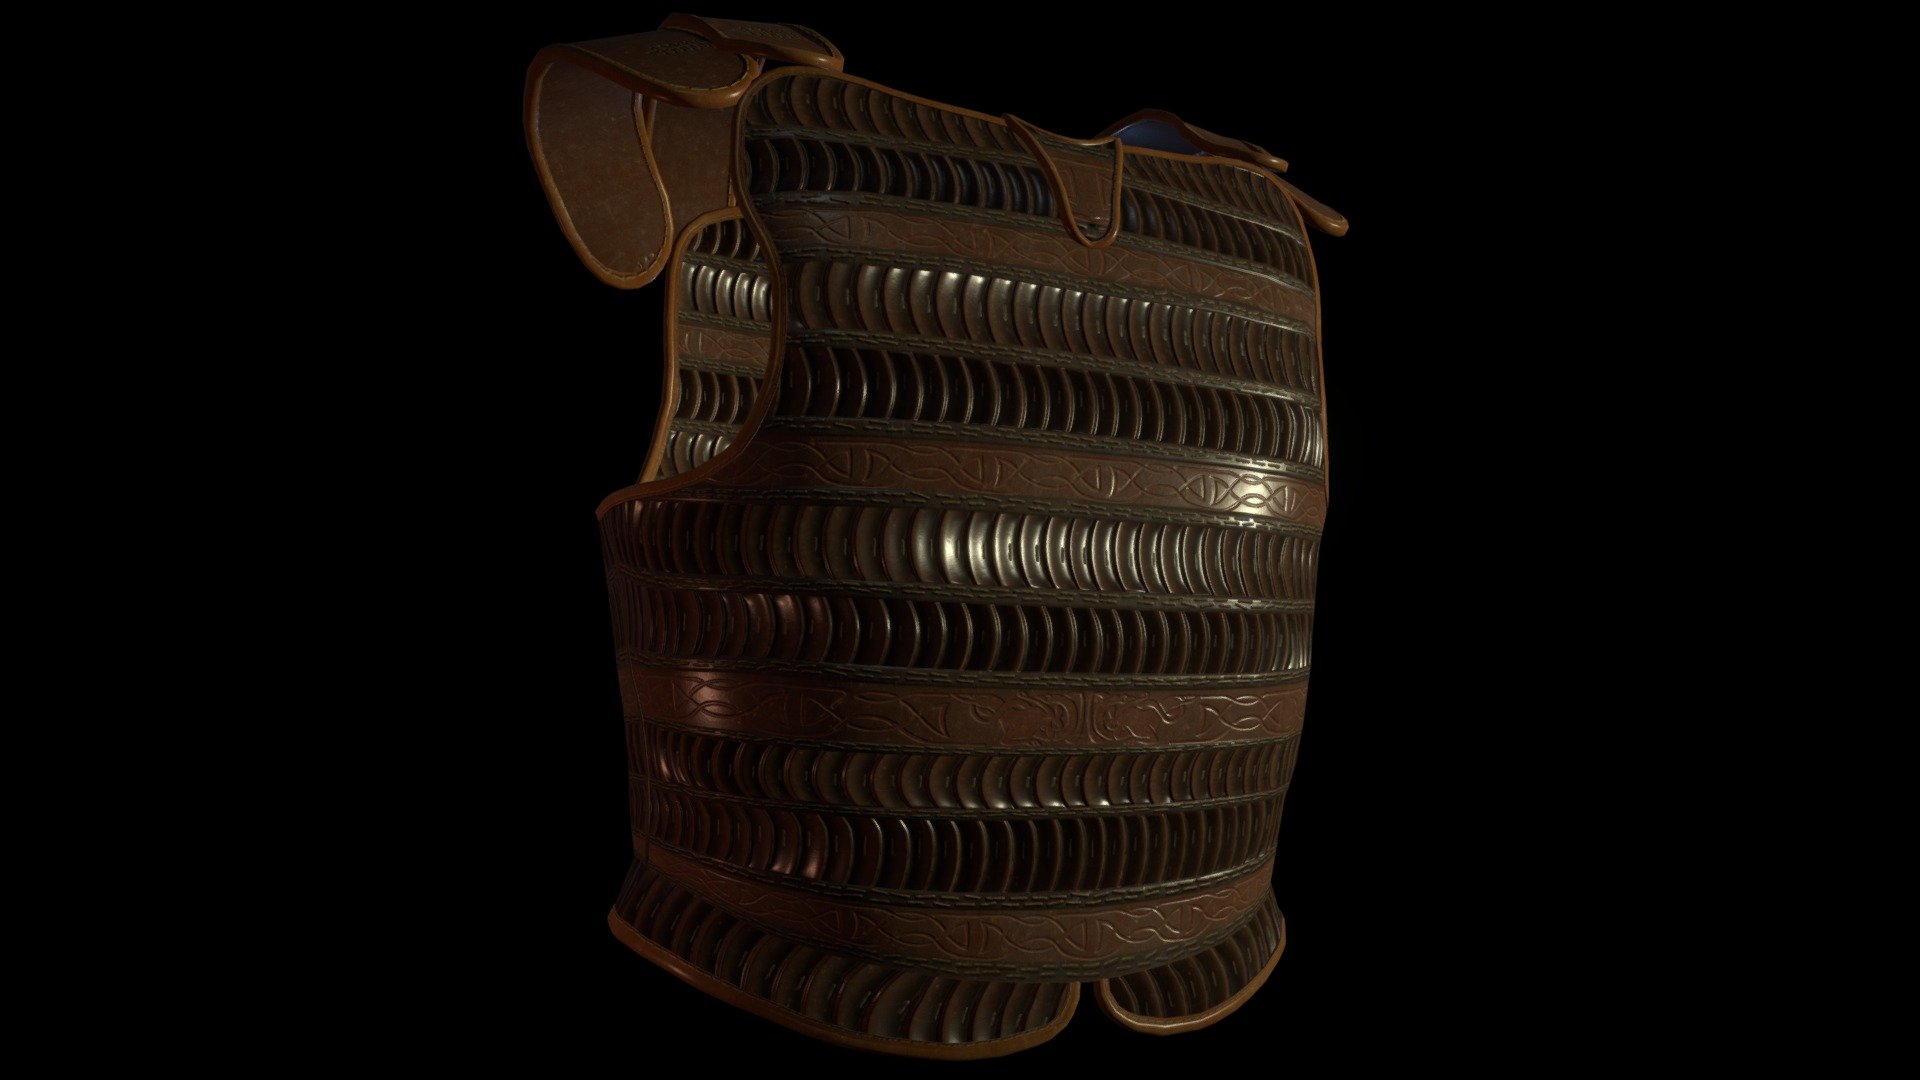 Lamellar armor with multitude plates of leather. As this type of armor is more common in Asia, this often give an oriental aspect to warrior, like Rus' Varangians.

This model have approximativelly 6 700 Vertices, and Shader is composed by Diffuse, Roughness and Normal Map, each one up to 4096px.

Native Fbx file from Blender.

Two UV Sets :
- One with overlapped part to maximize textures projection 
- The second with every UV island proportionnaly Scaled and separated 3d model